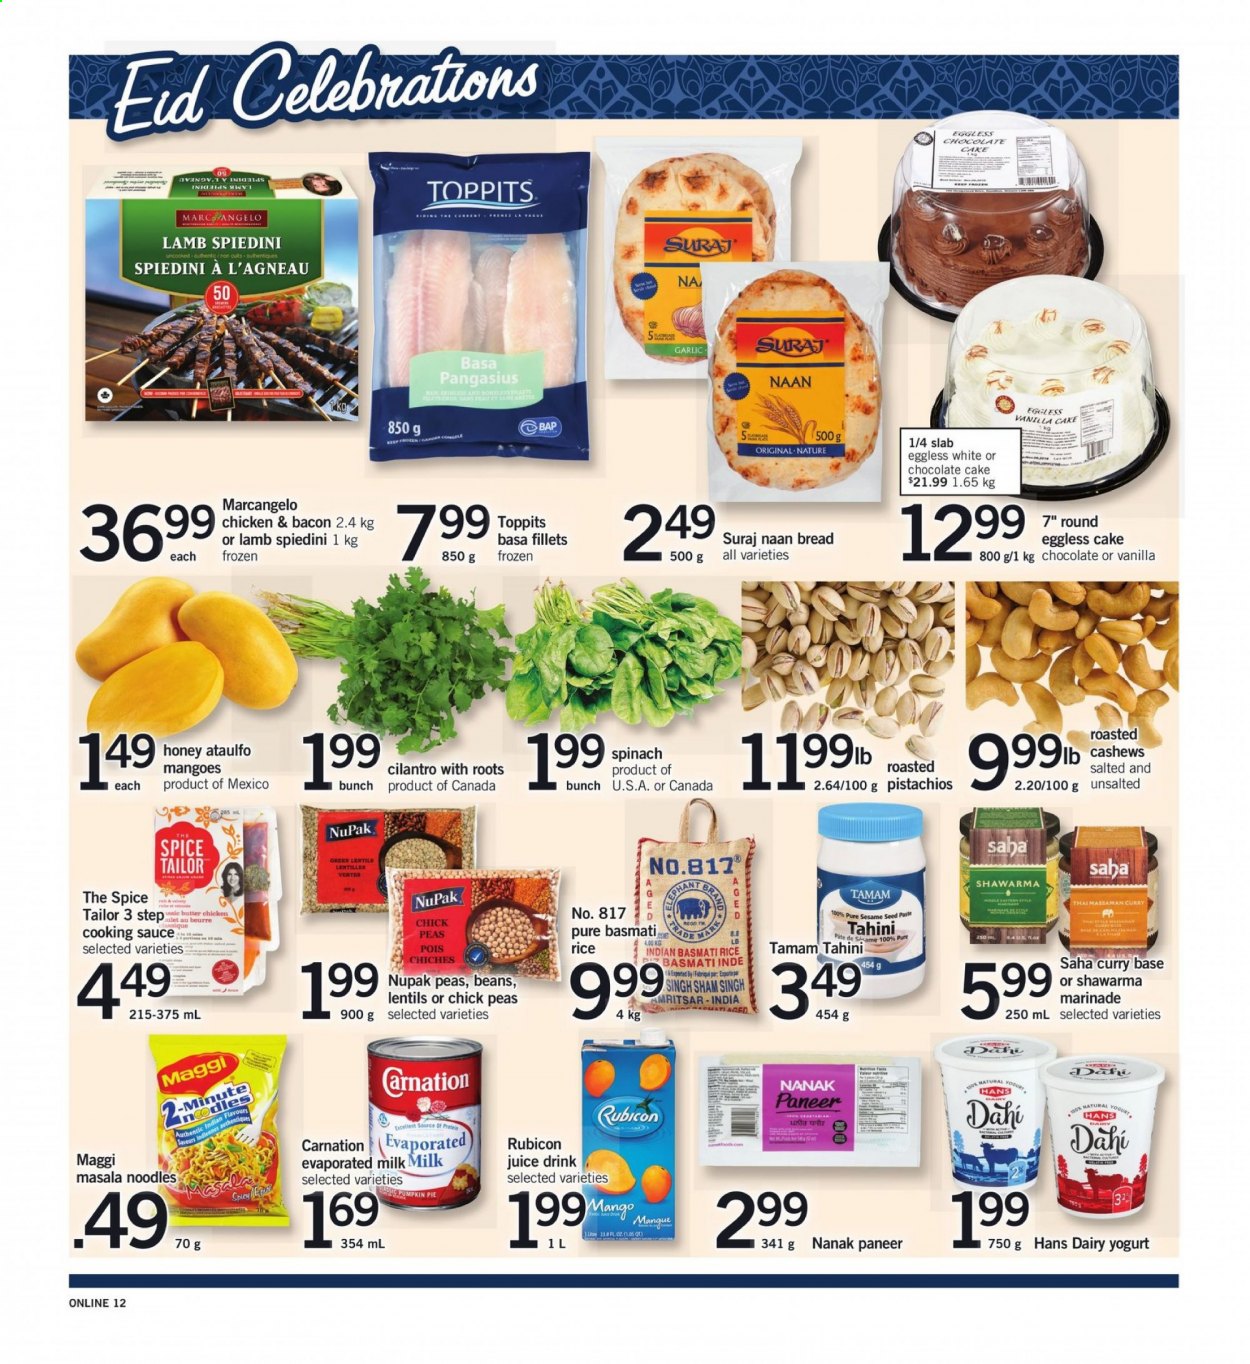 thumbnail - Fortinos Flyer - July 22, 2021 - July 28, 2021 - Sales products - bread, cake, pie, chocolate cake, garlic, pumpkin, pangasius, sauce, noodles, bacon, paneer, yoghurt, evaporated milk, butter, chocolate, Celebration, sesame seed, Maggi, lentils, basmati rice, rice, cilantro, spice, tahini, marinade, honey, cashews, pistachios, juice, punch, Ron Pelicano, TV. Page 13.